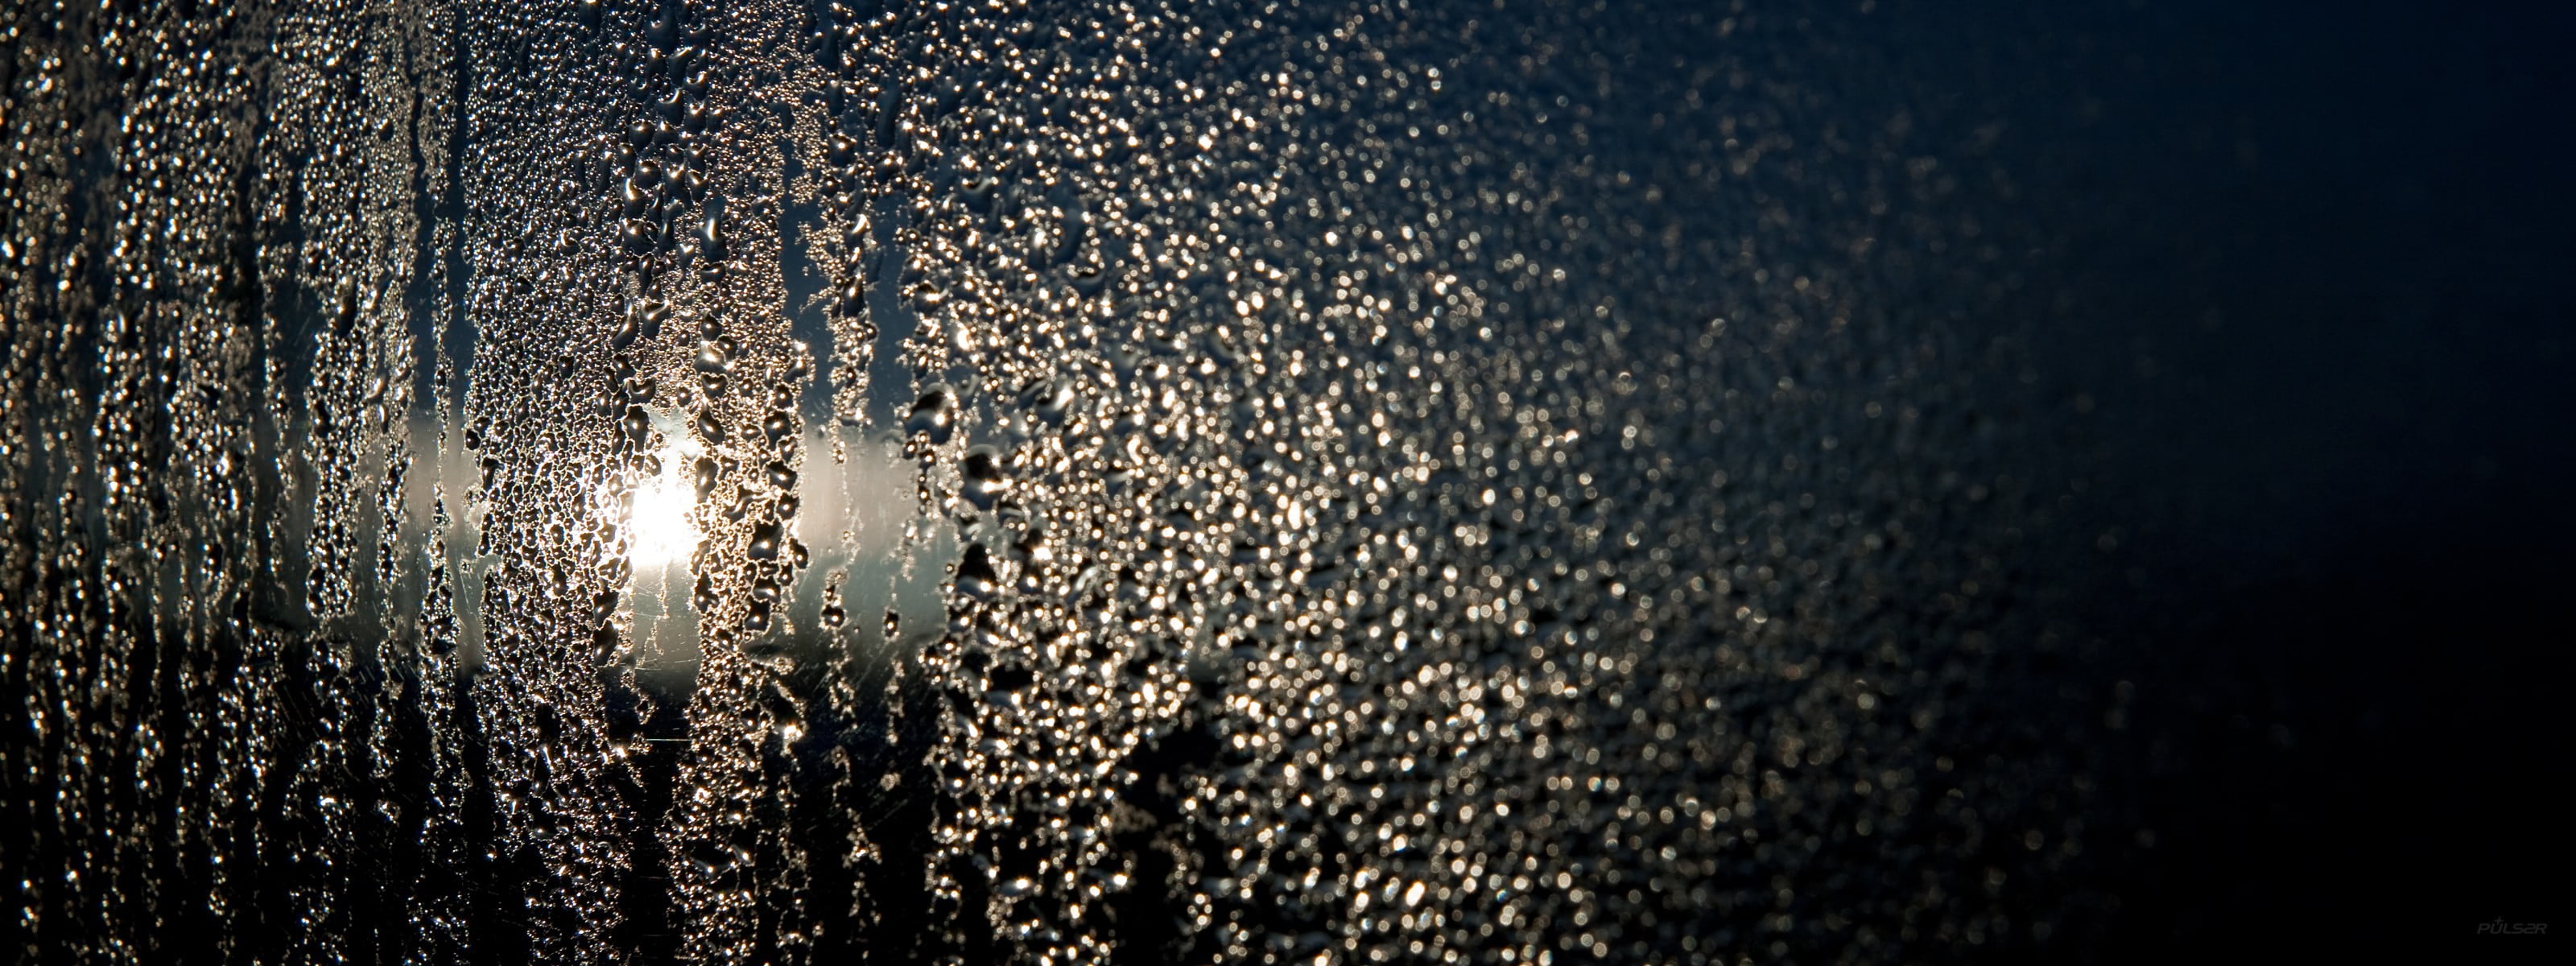 water on glass, multiple display, water drops